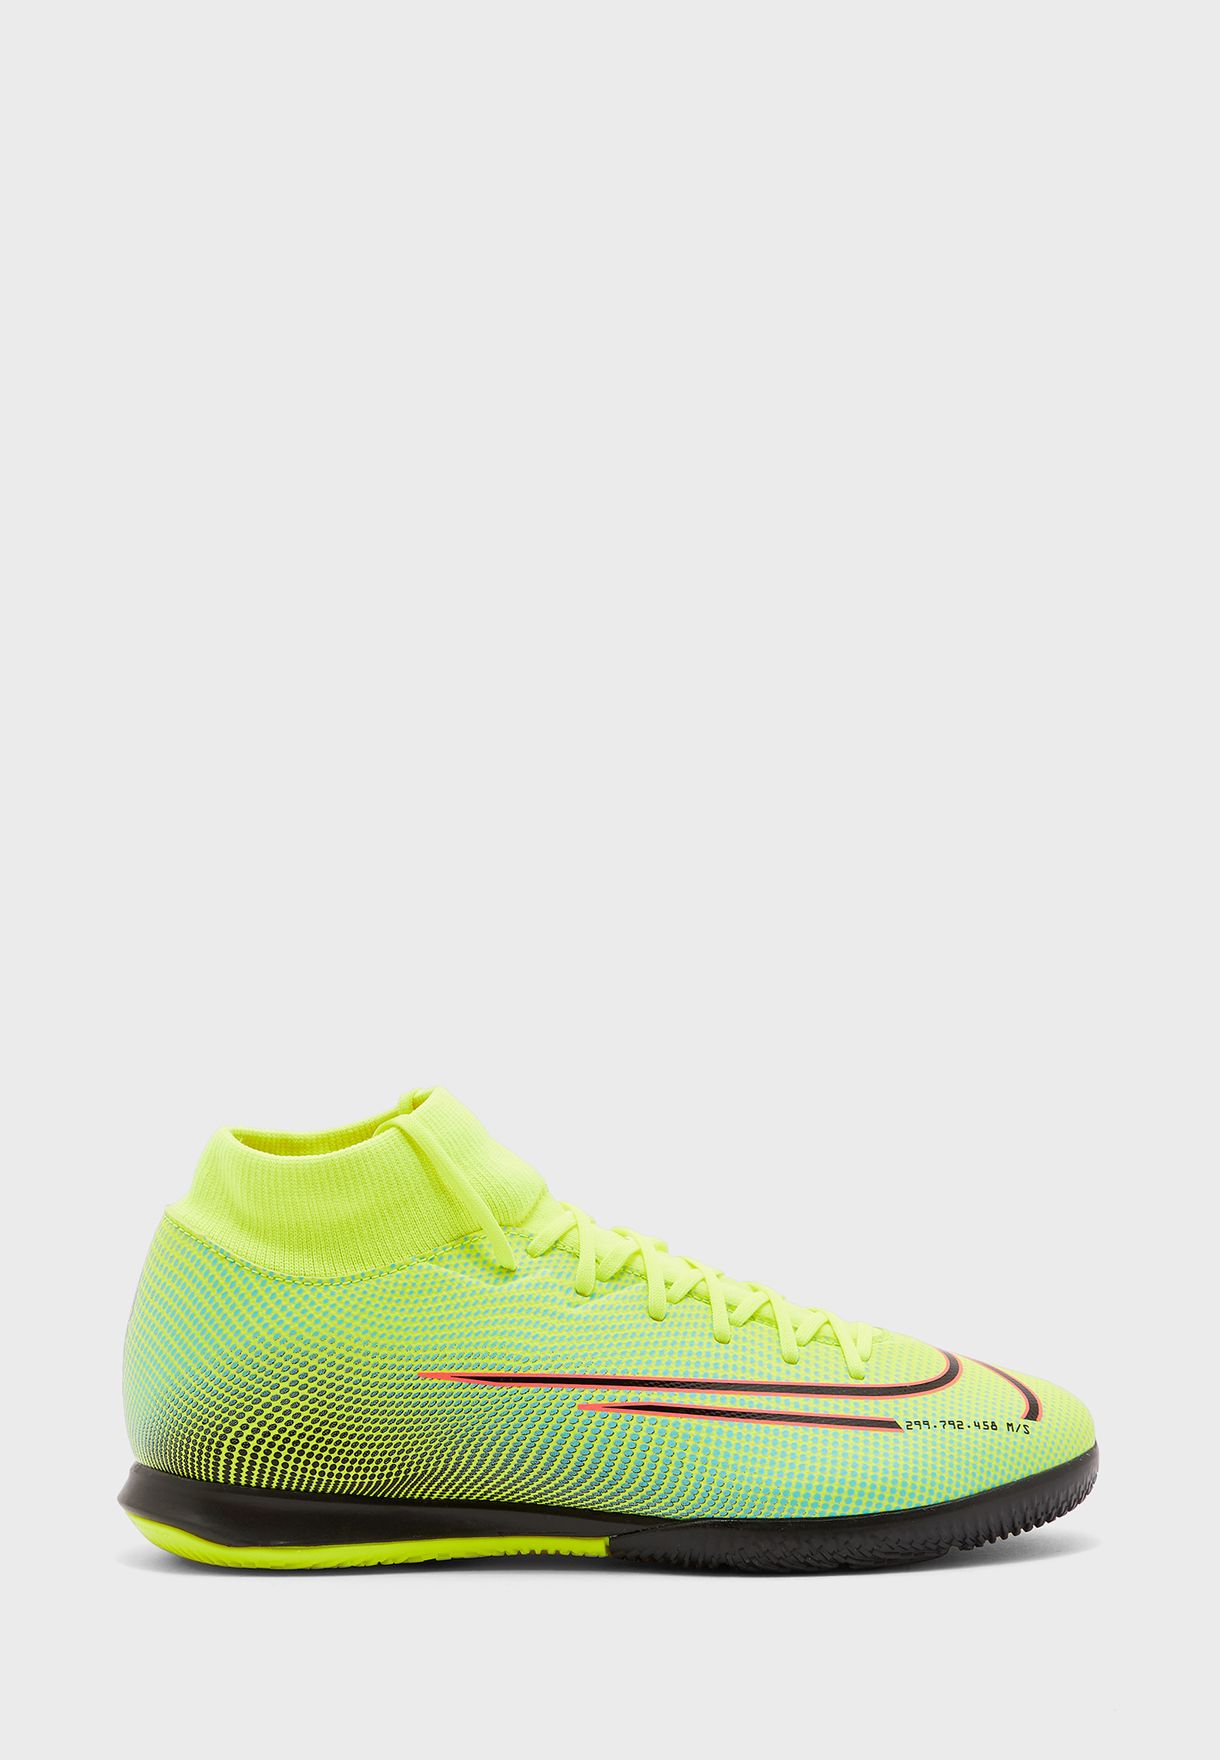 Nike Youth Mercurial Superfly 7 Academy MDS.Amazon.com